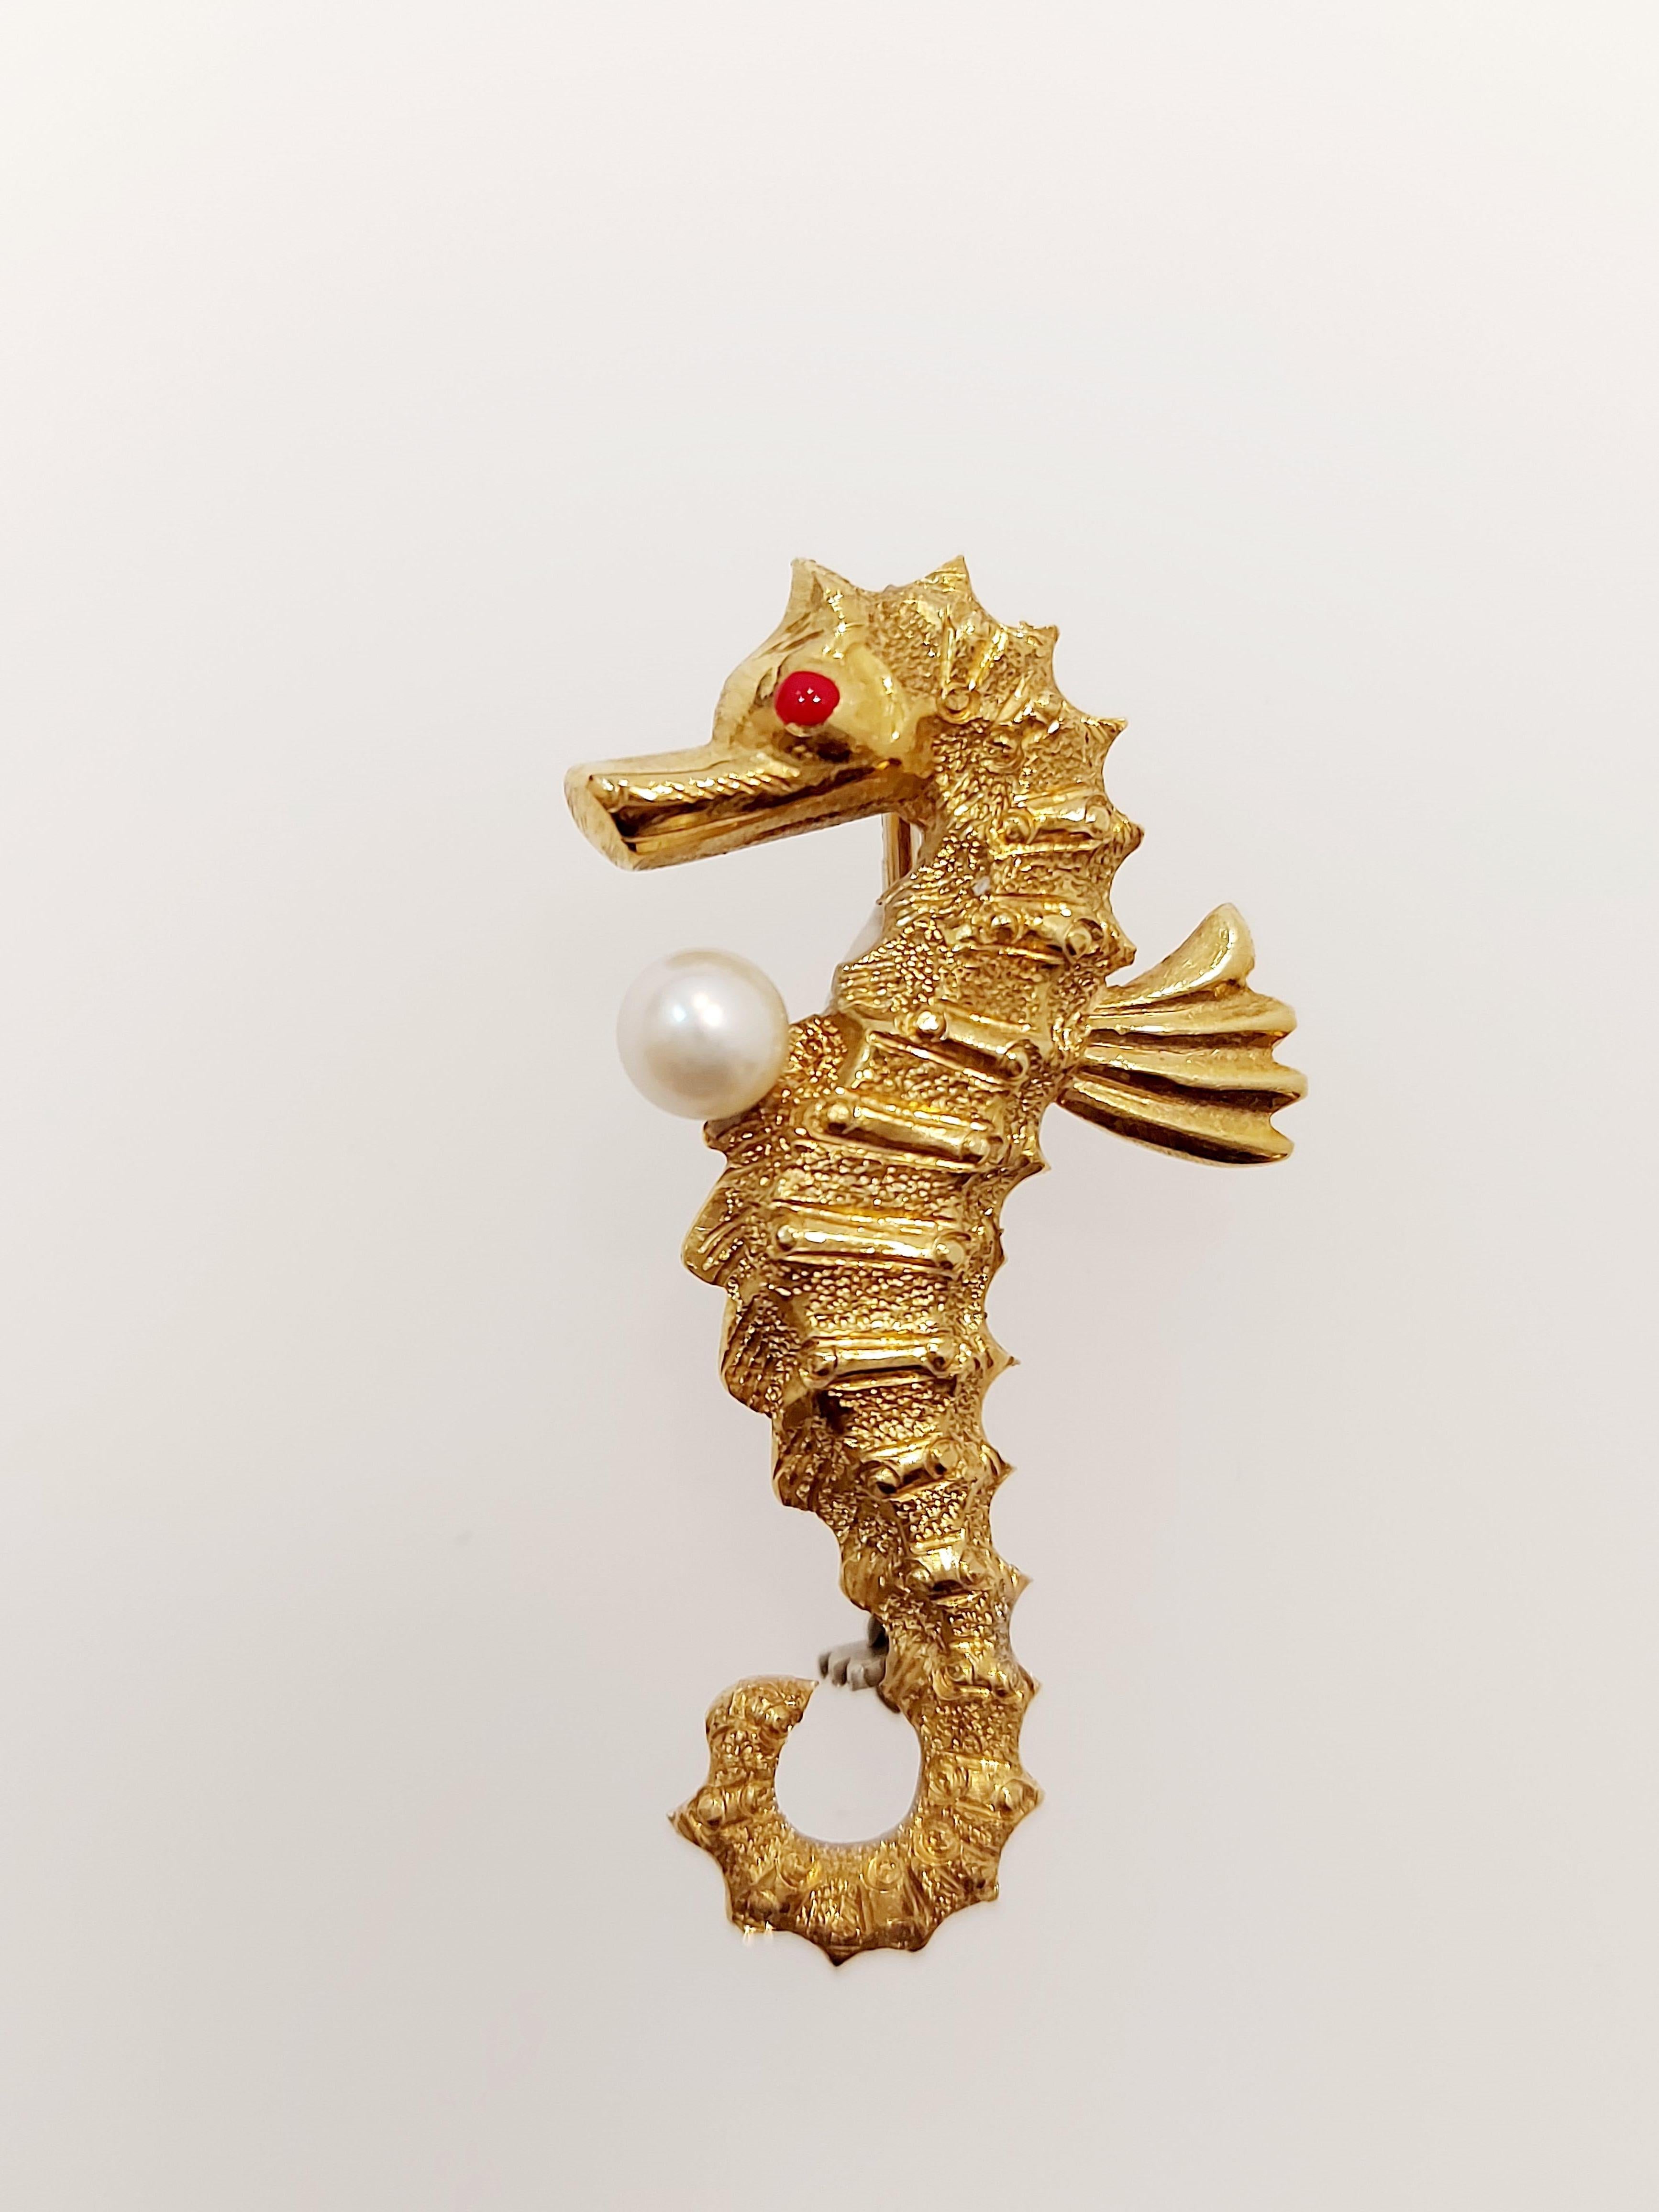 A seahorse brooch set pearl and with red eye, hallmarked 18ct gold textured body detail with a 4mm cultured pearl and red enamel eye.